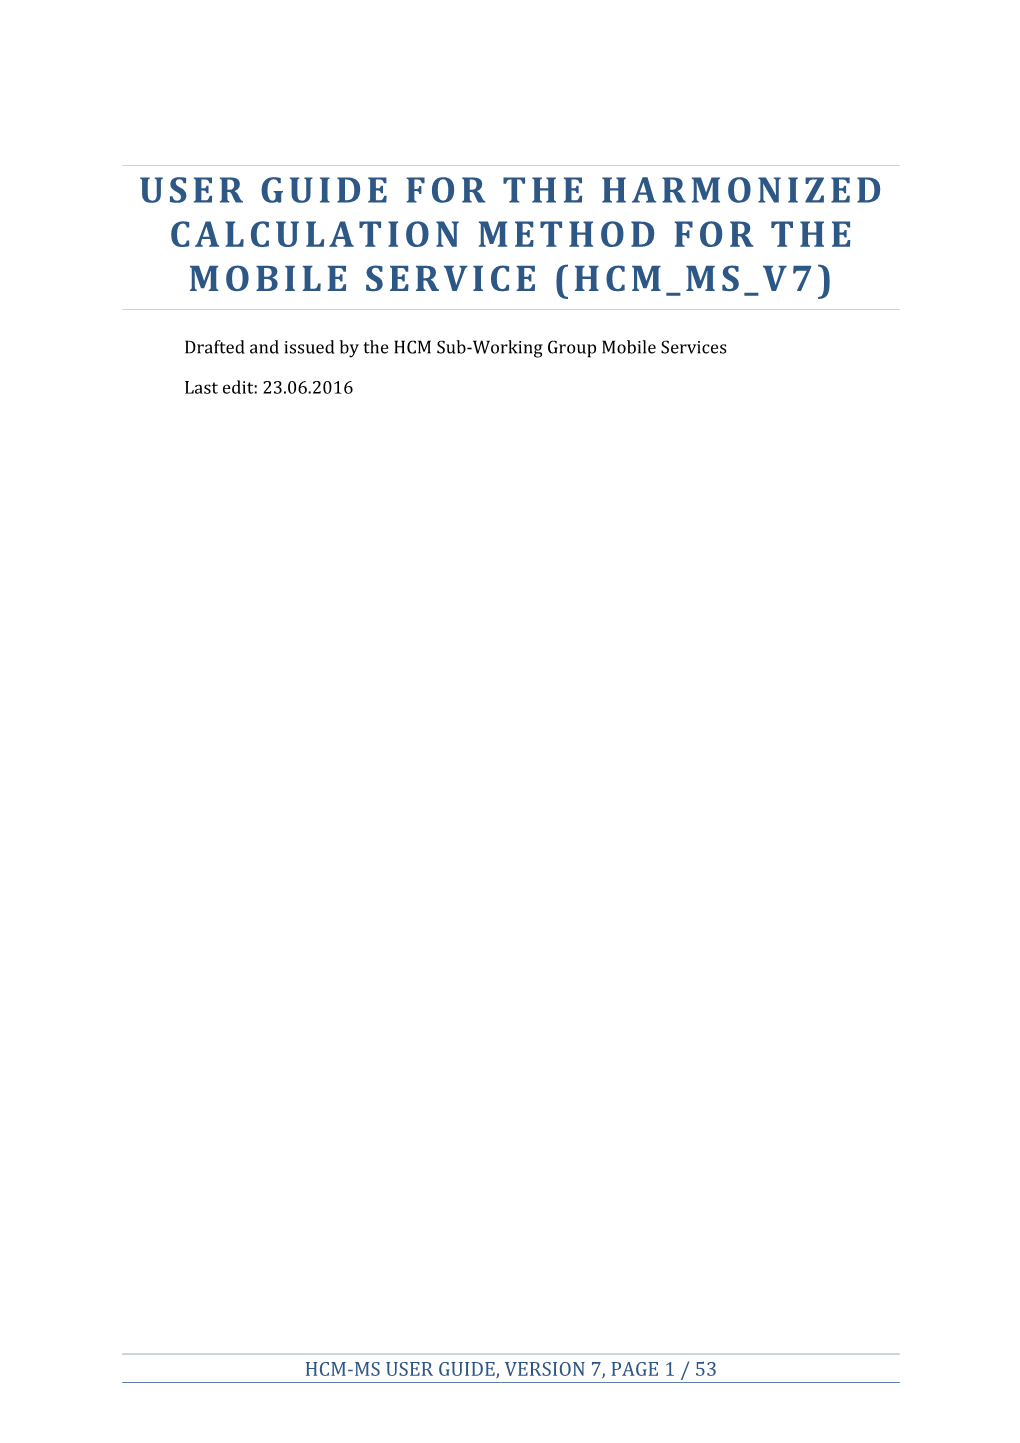 Drafted and Issued by the HCM Sub-Working Group Mobile Services